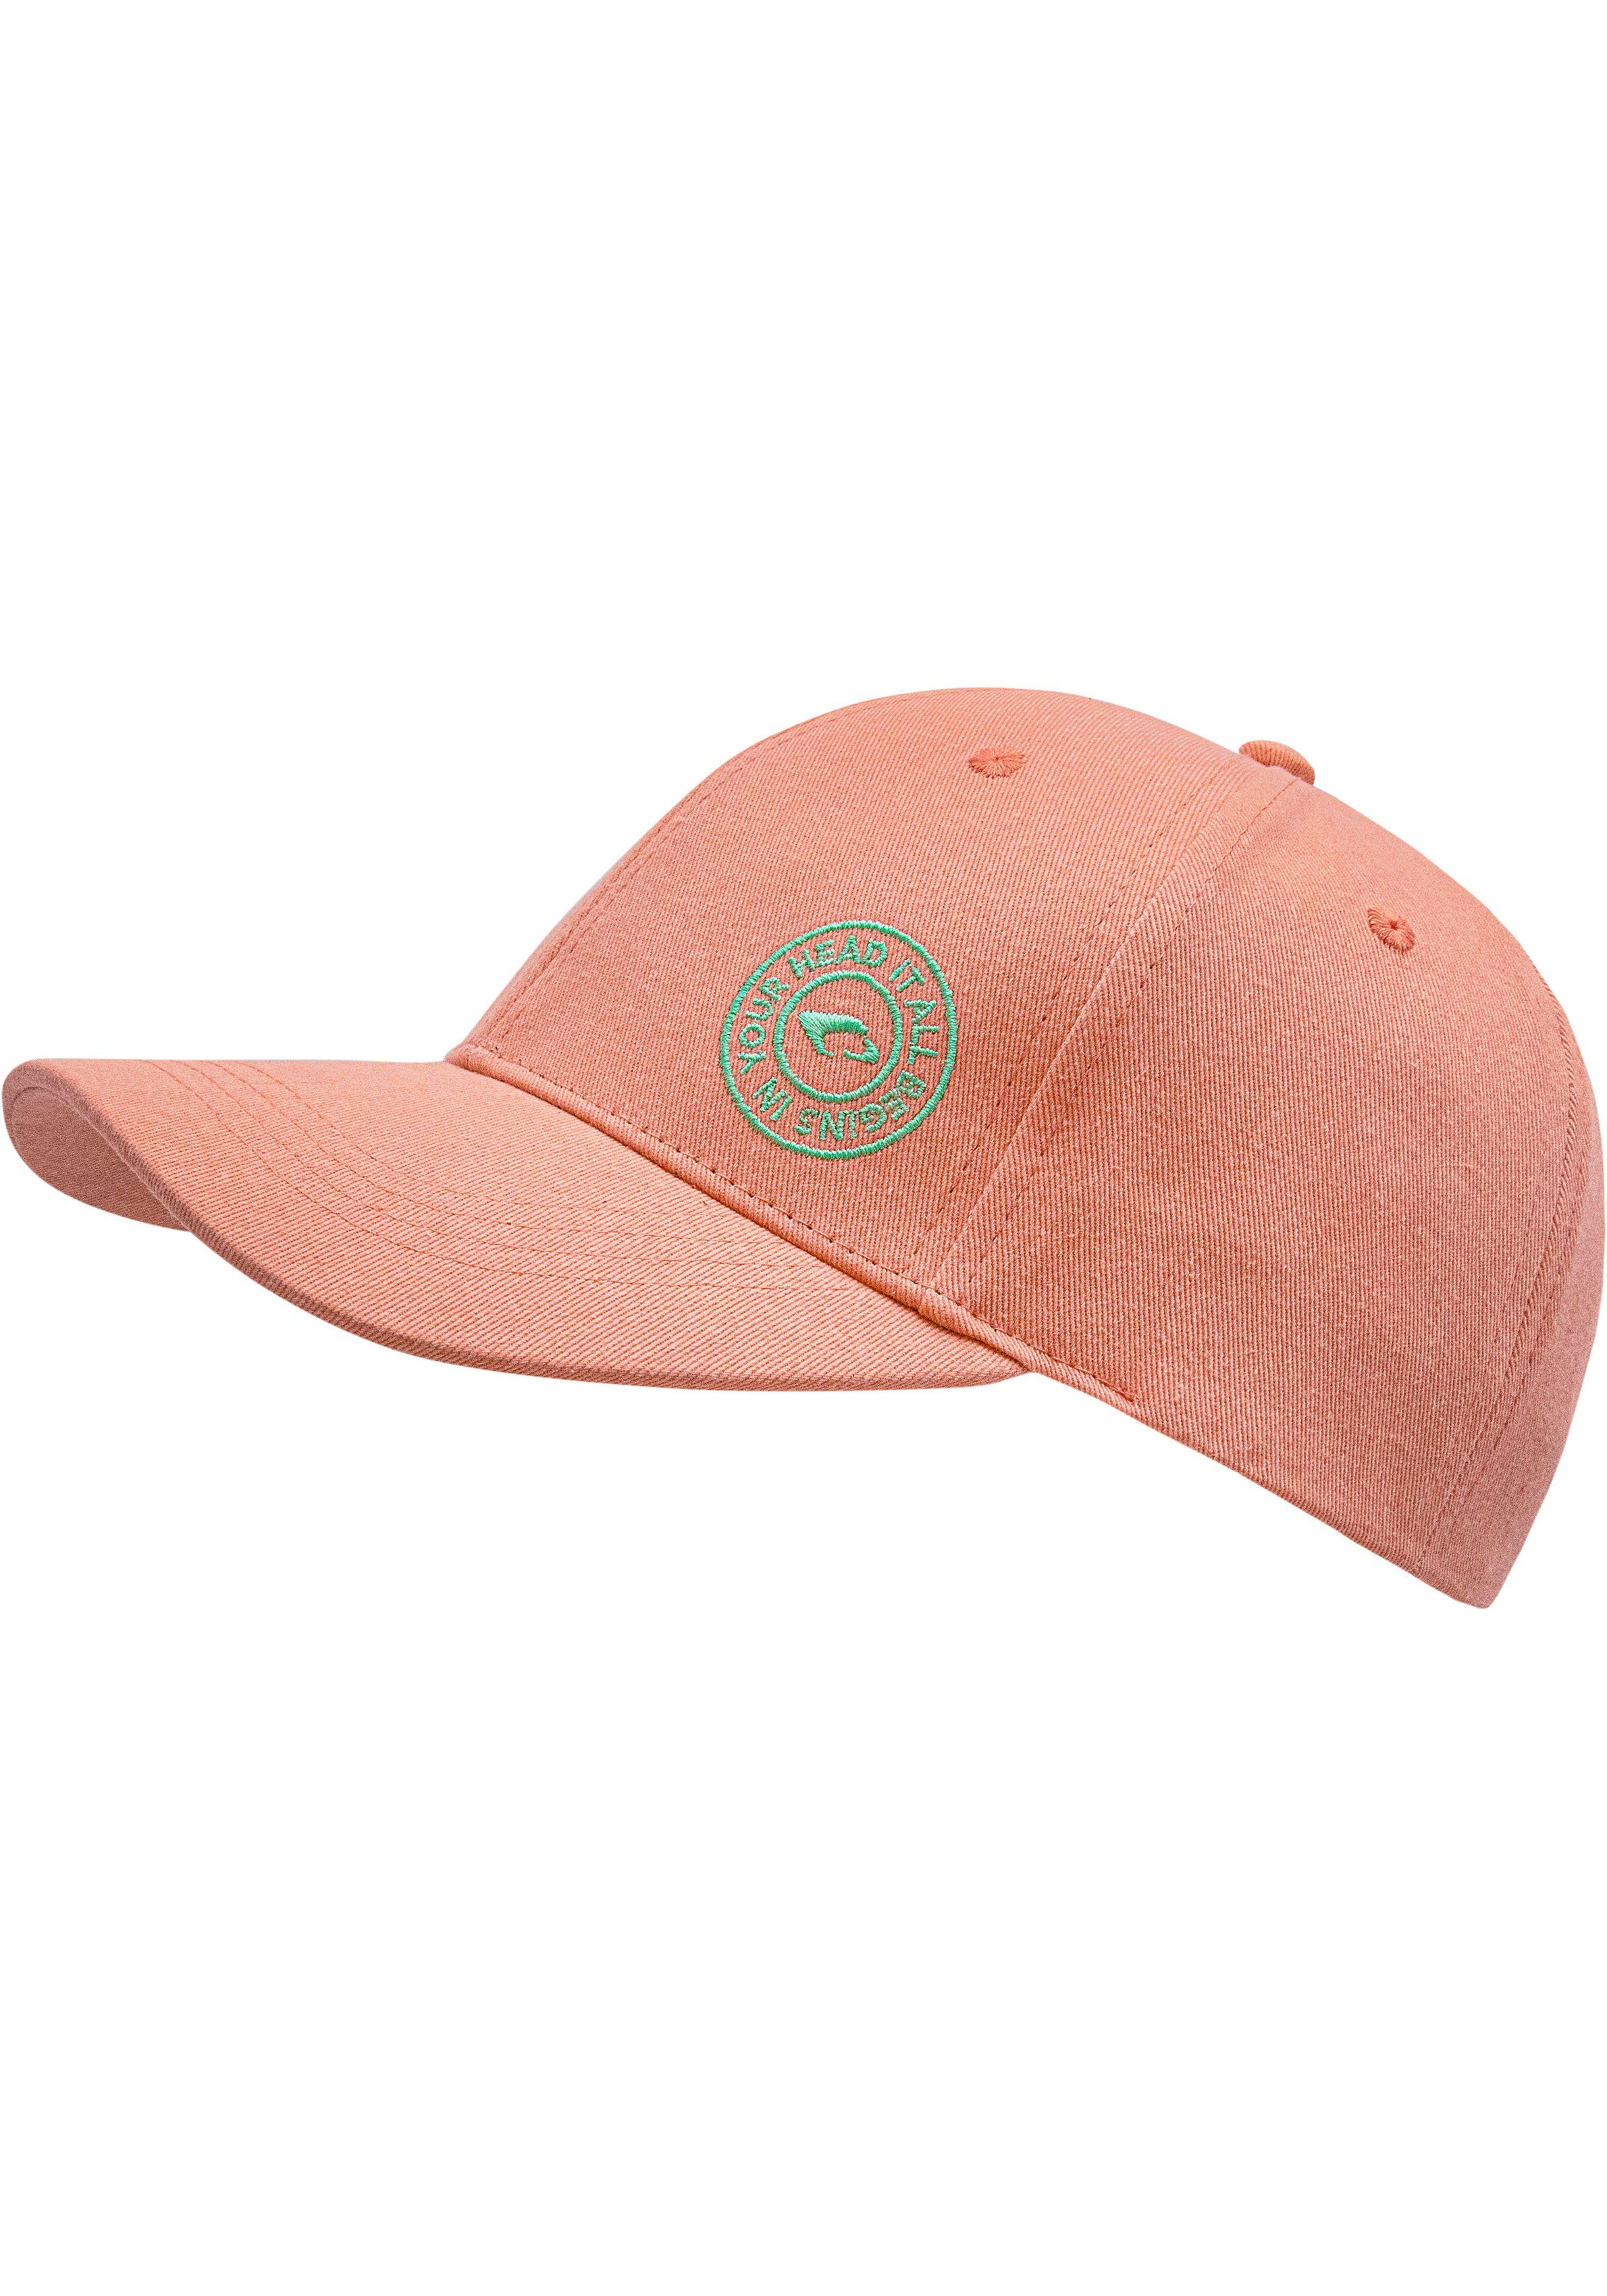 Arklow Hat chillouts Baseball coral Cap